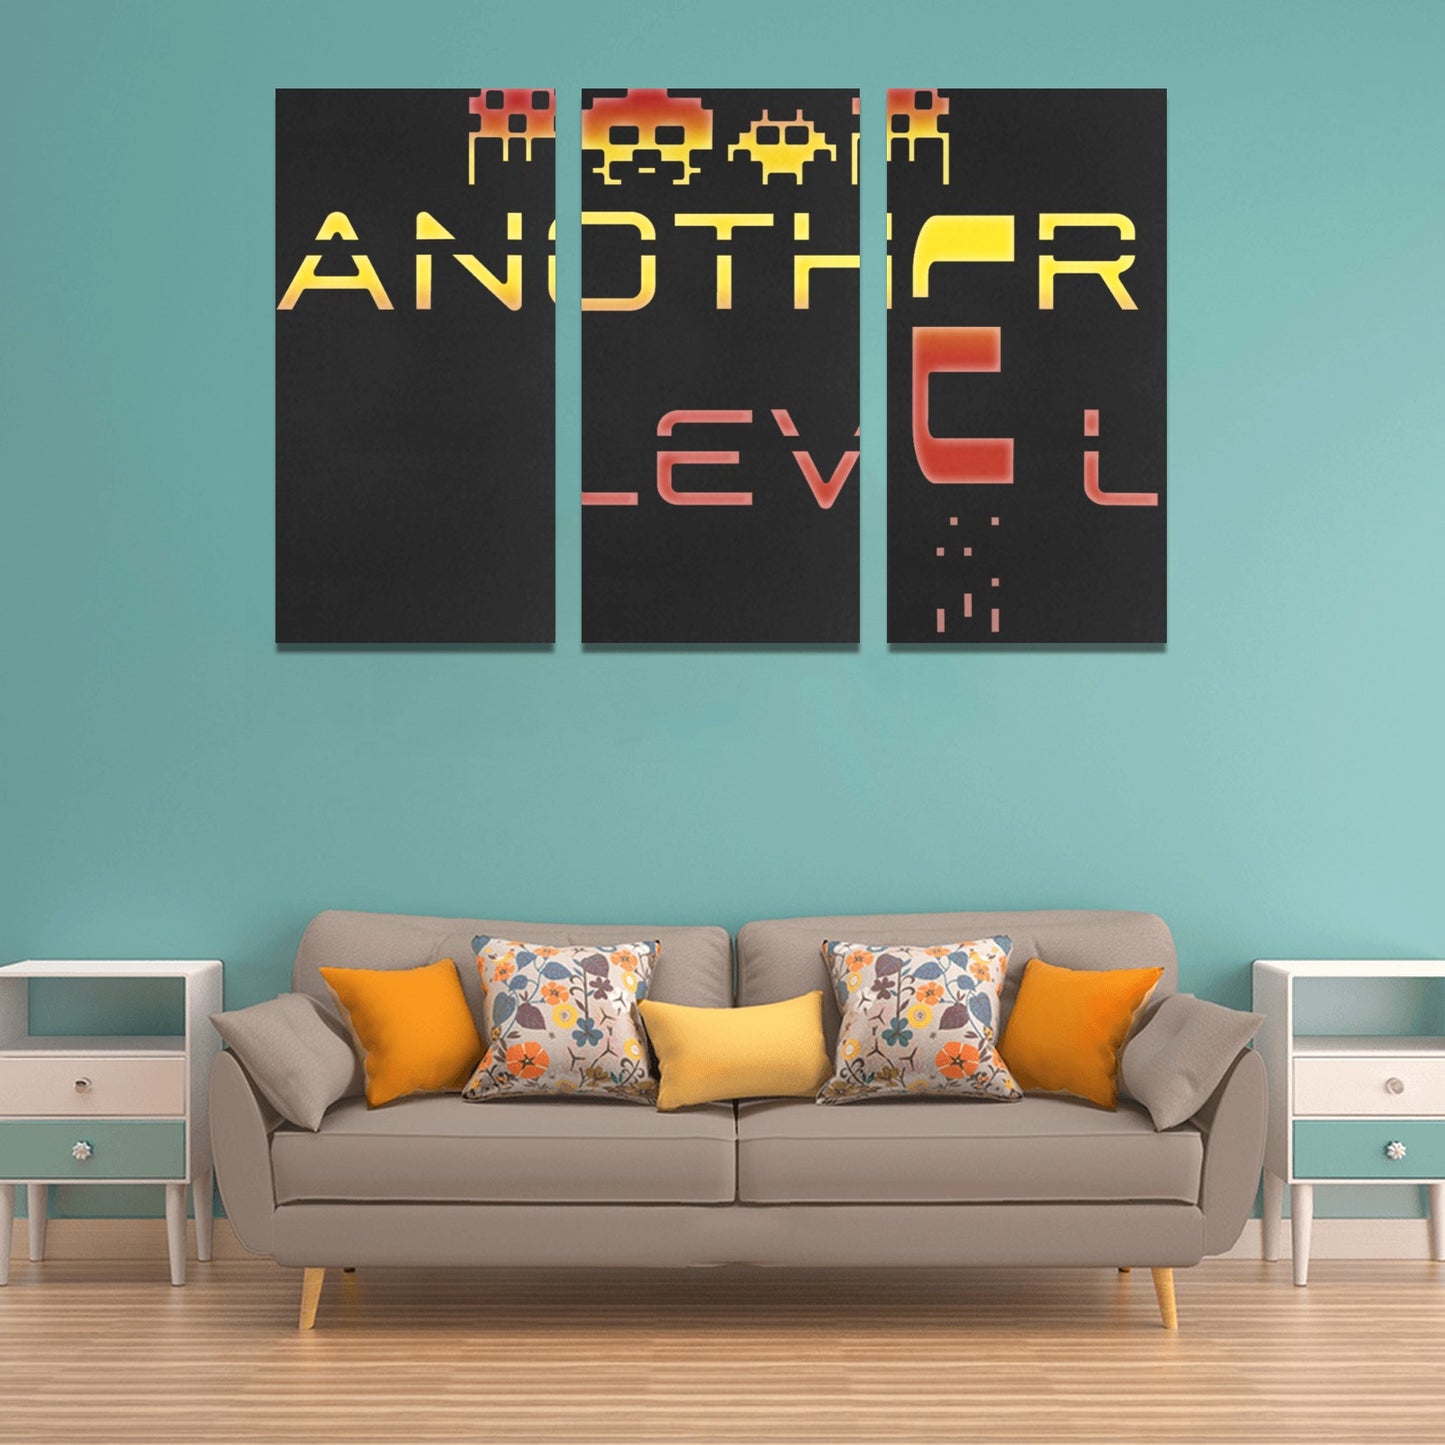 fz design collection too one size / fz another level - red too framed canvas art prints set x (3 pieces) (made in usa)